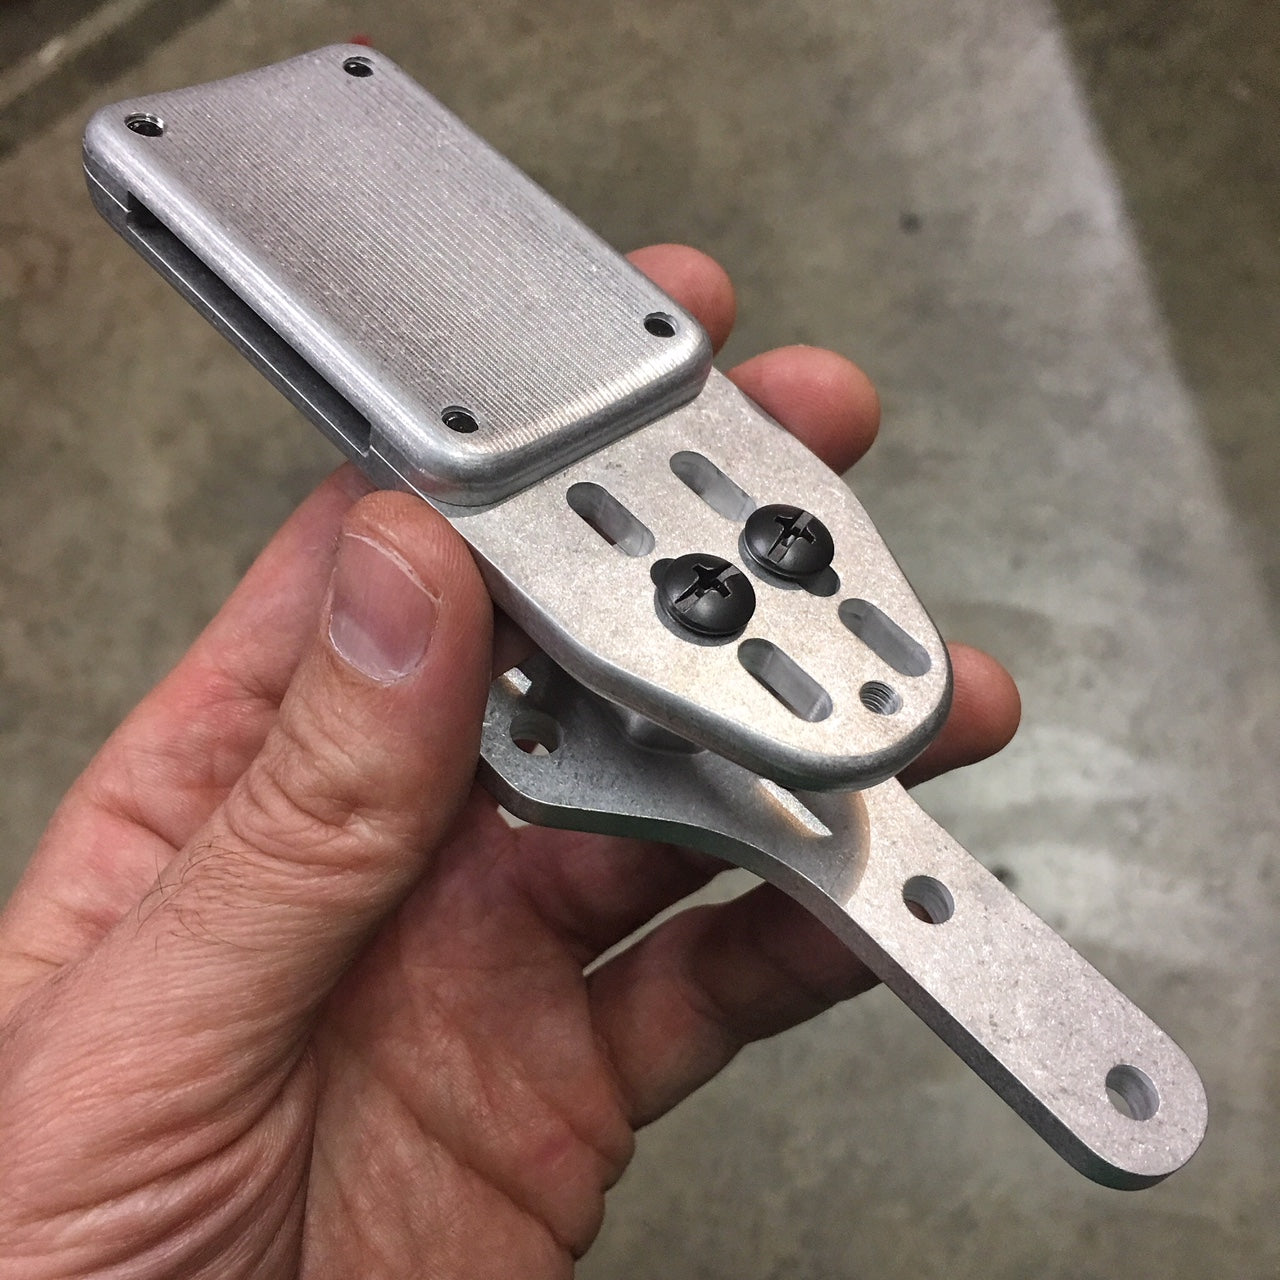 Machined from 6061 aluminum Offset hanger slots allow cant and ride height adjustments Fits 1 1/2" width belt ONLY Compatible with the Bladetech/Comp-tac hole pattern as well as G-Code and some Safariland patterns. Edges and corners are blended and smoothed to reduce wear and tear on your hand